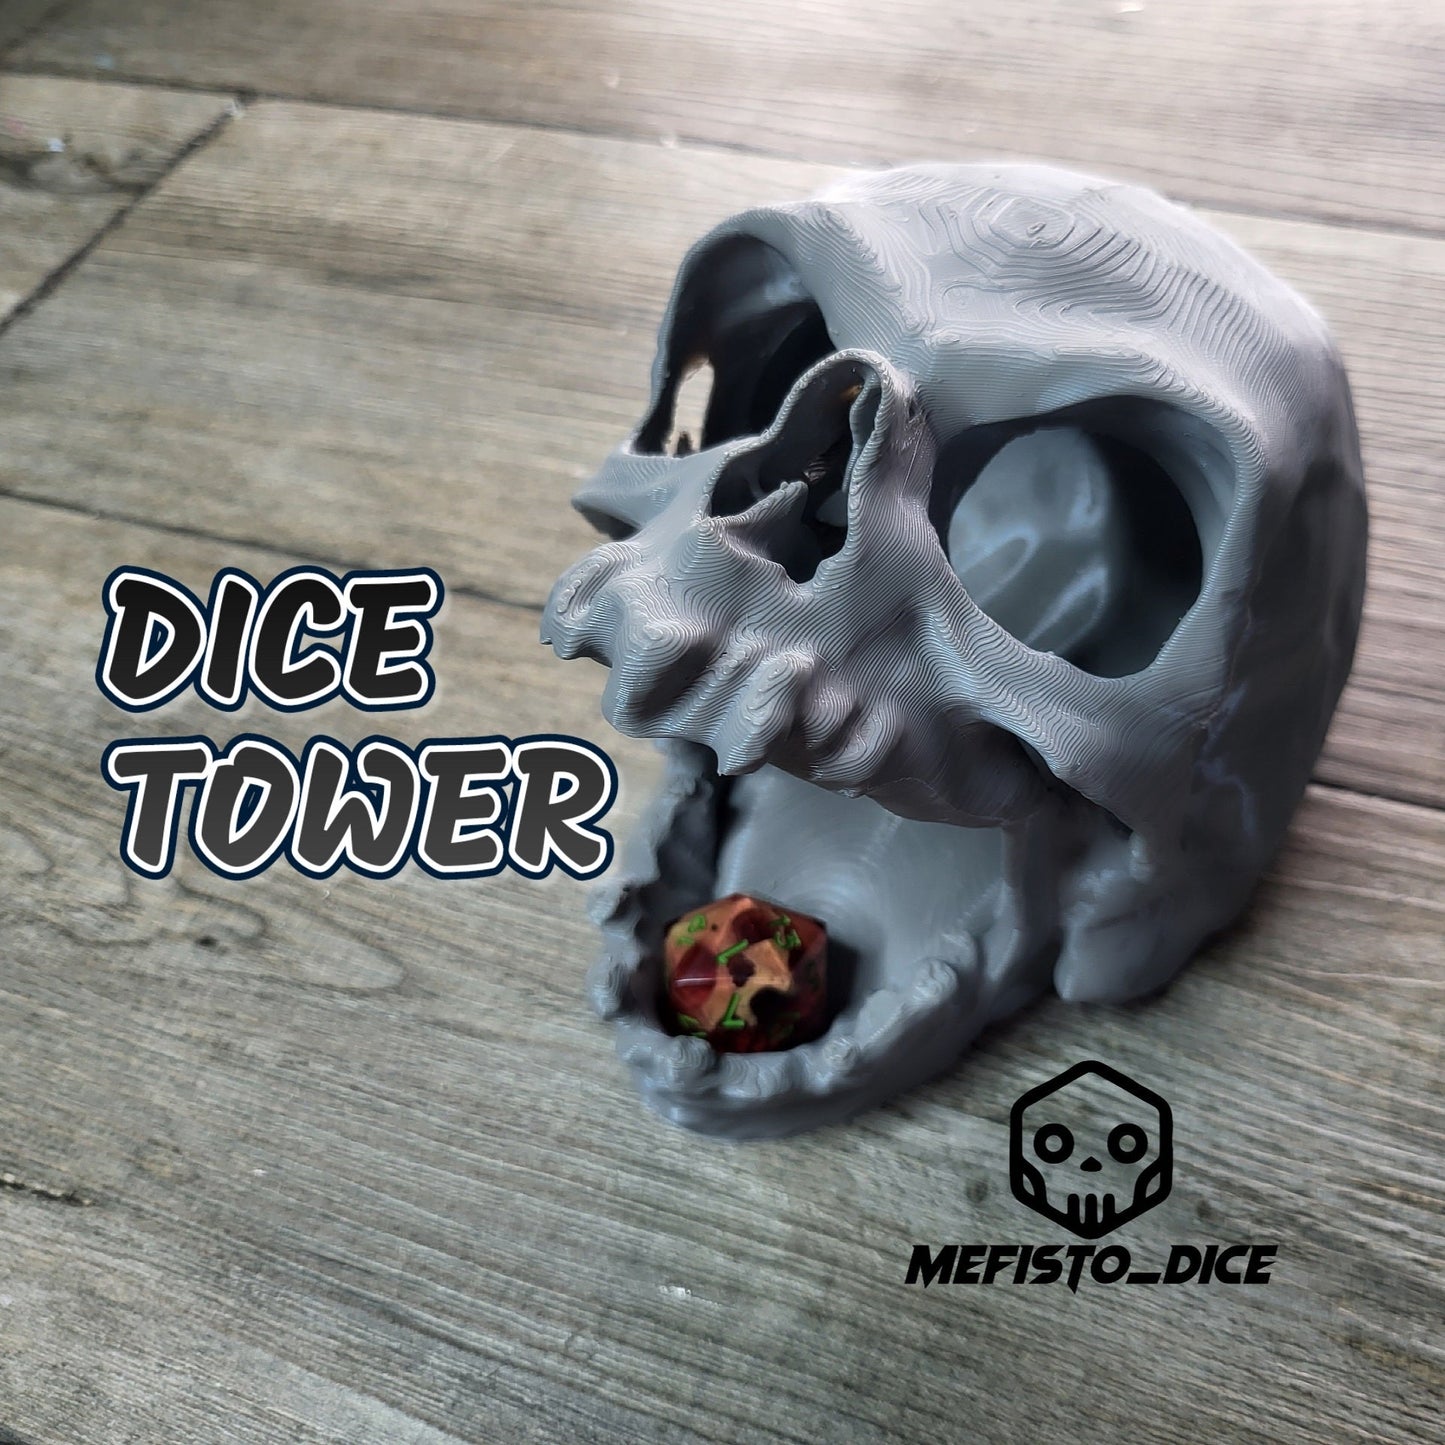 Dice tower for dice rolling for role-playing games